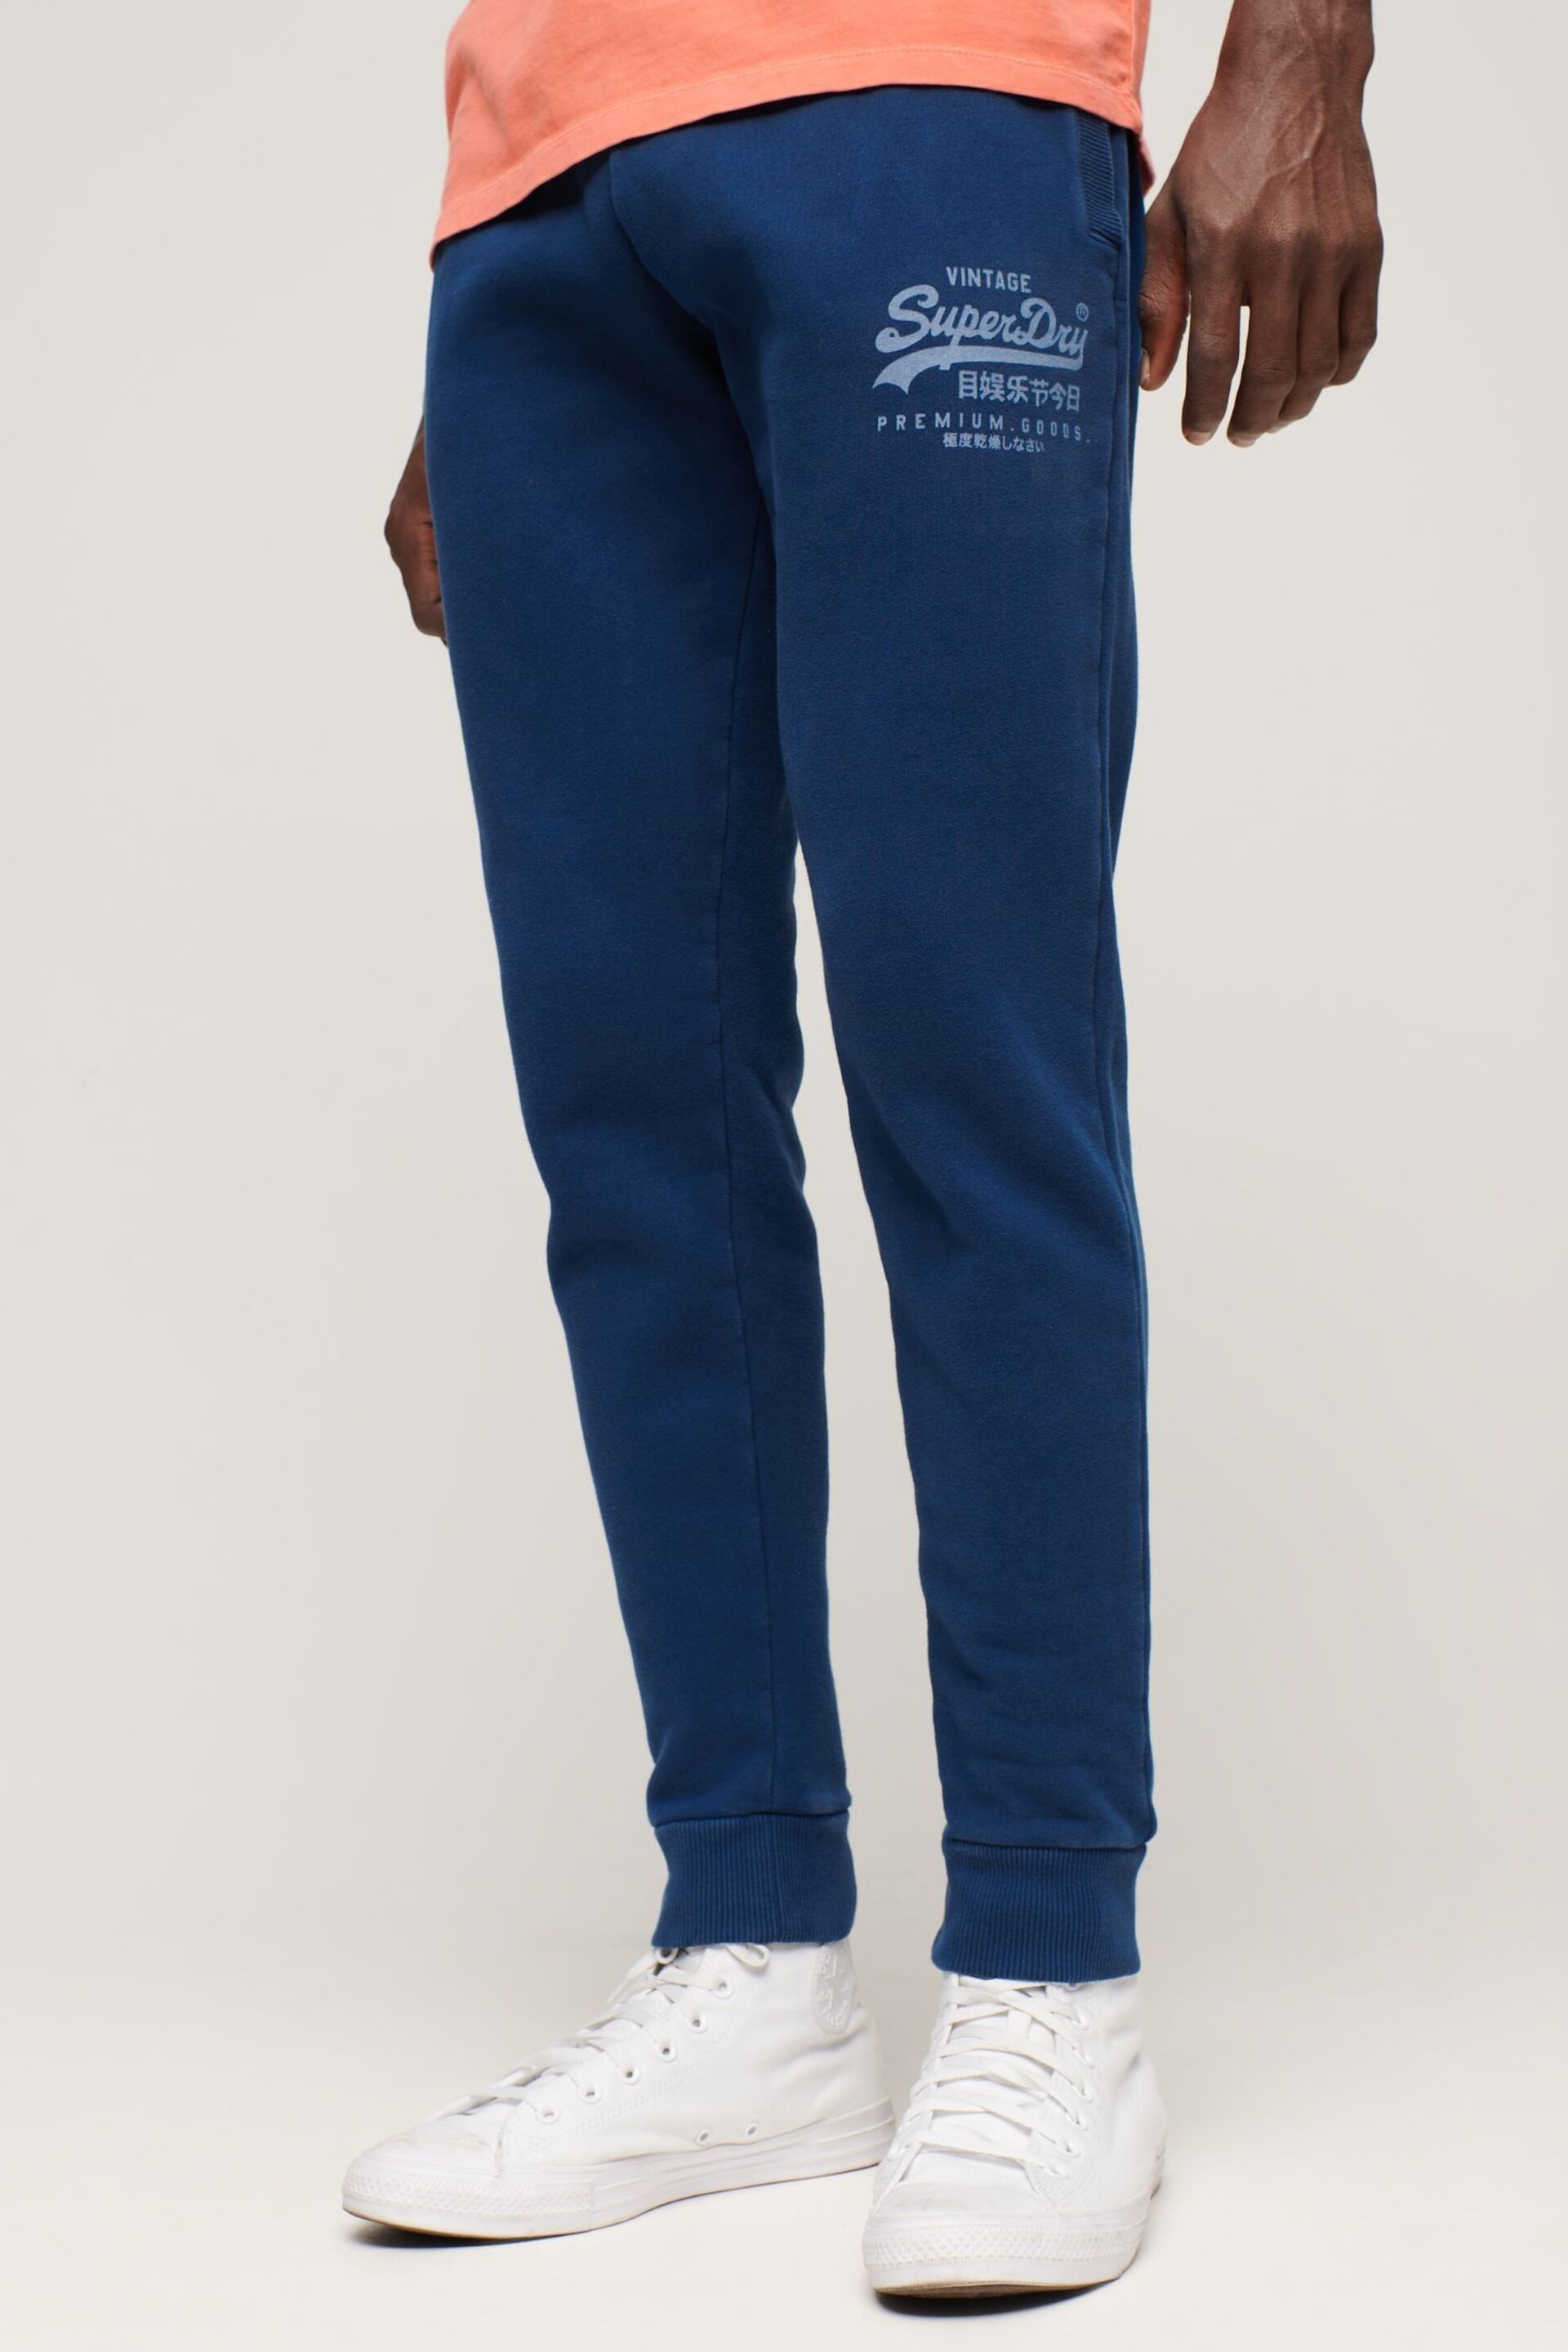 Superdry Blue Classic Vintage Logo Heritage Joggers - Image 1 of 4